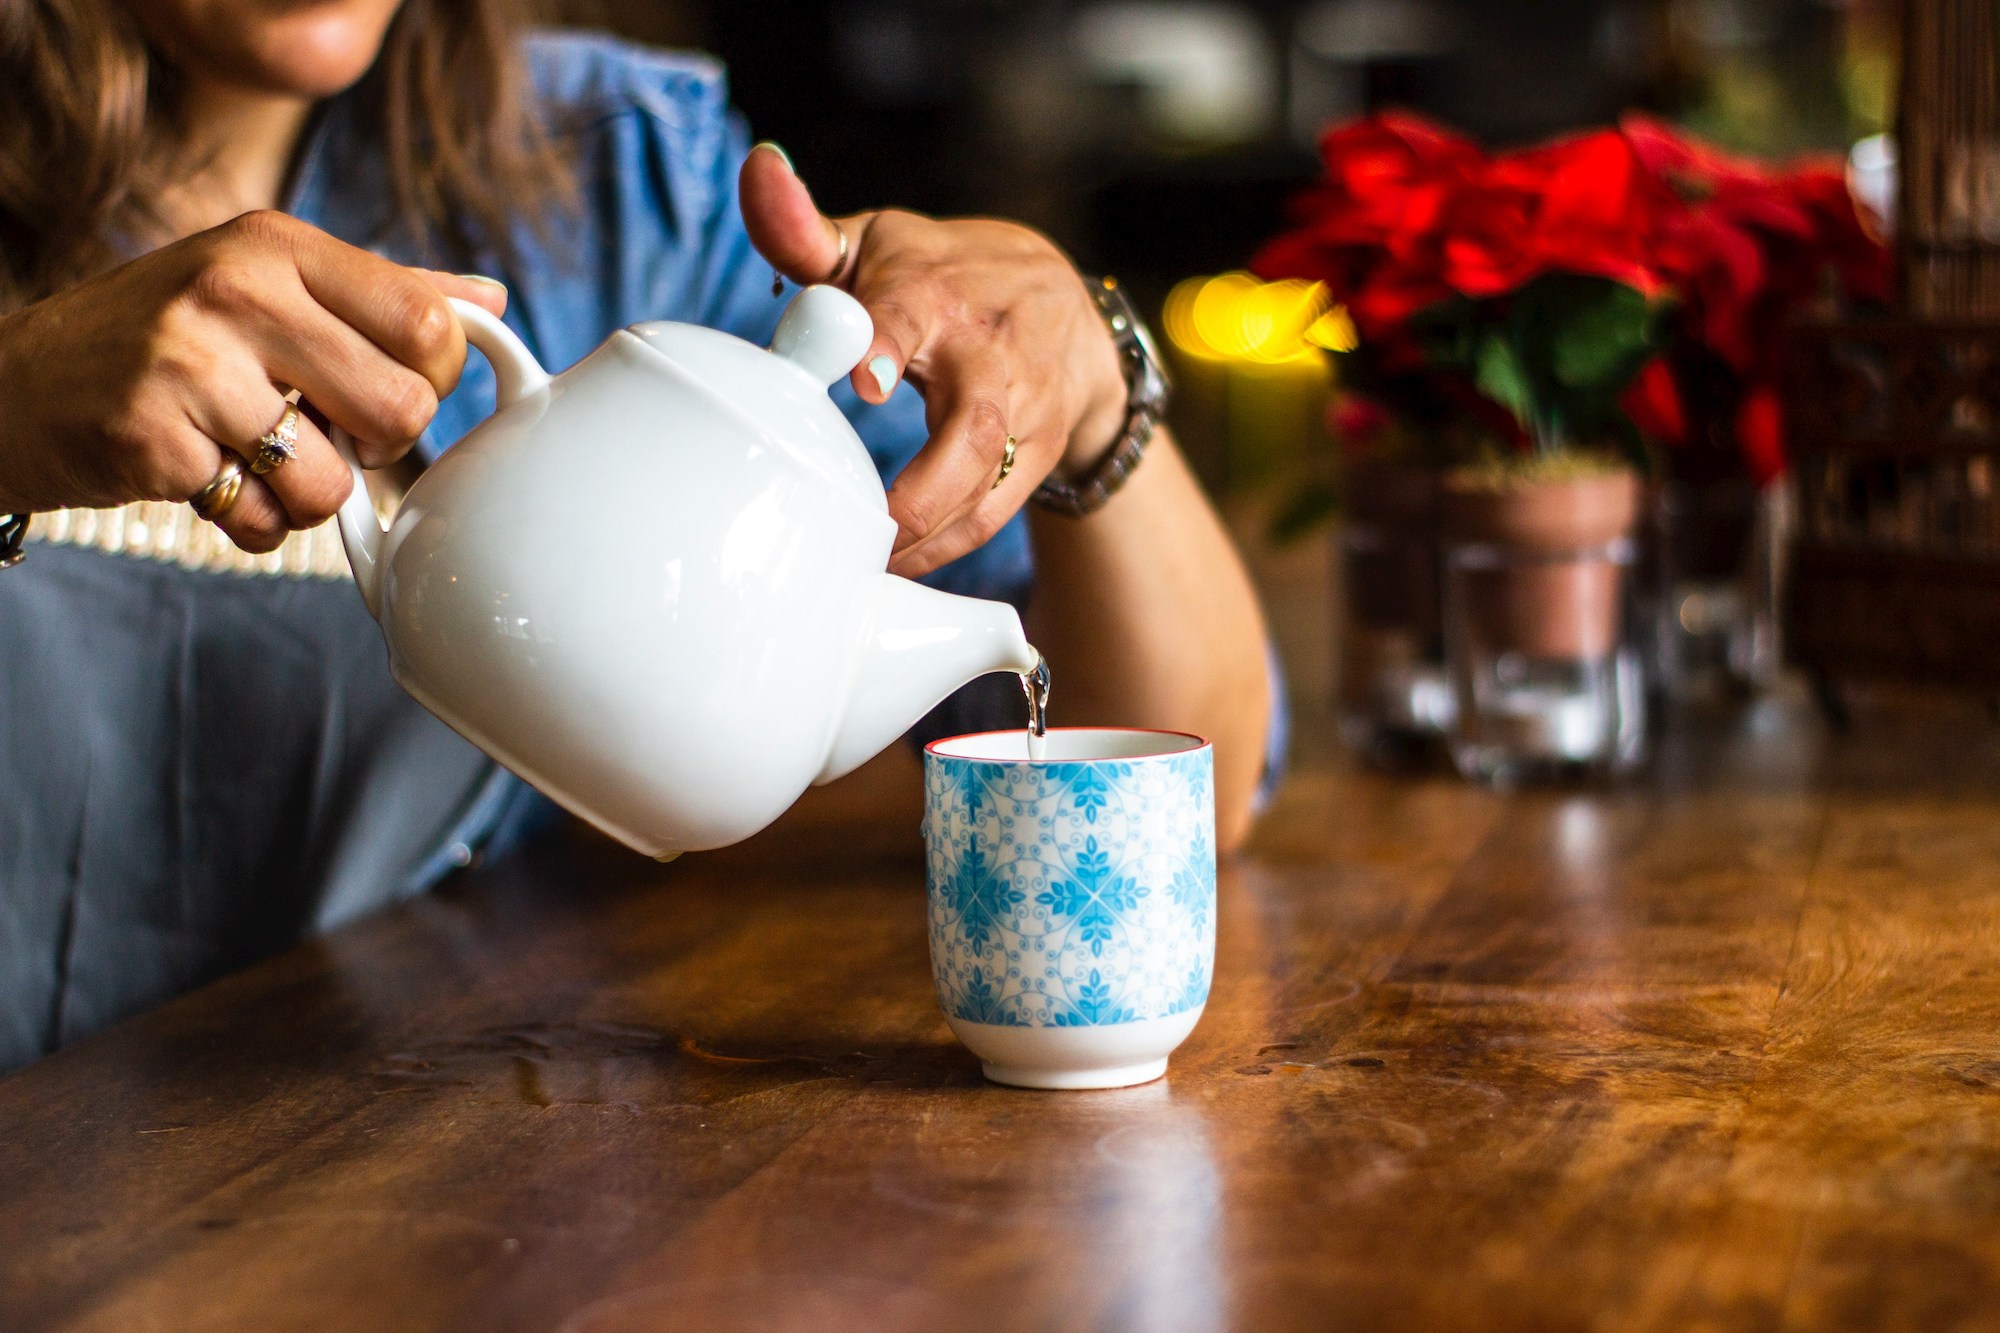 A local-expert from chester-based estate agency Currans Homes pours a cup of tea from a white teapot into a patterned cup for a potential lettings client on the search for the 'right' Chester-based letting agent.